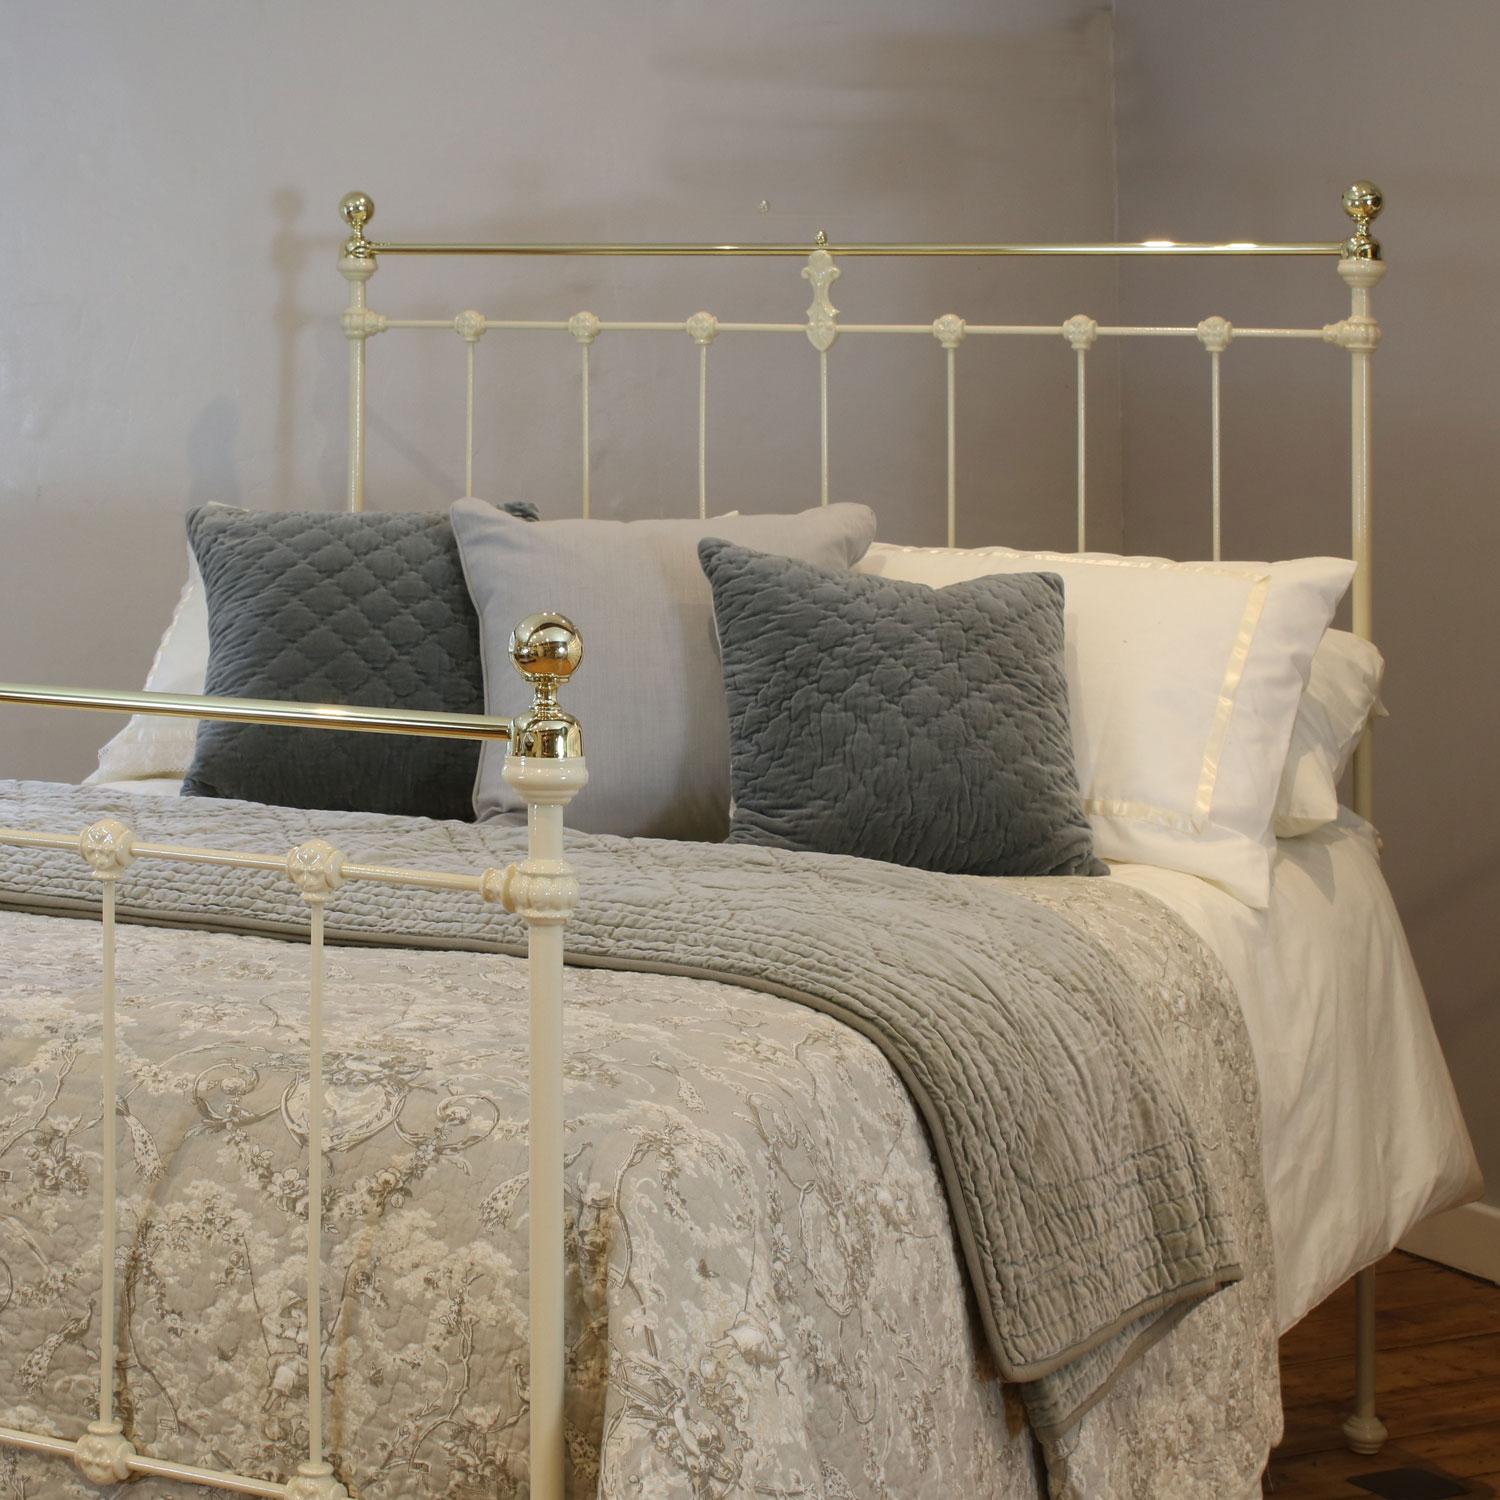 Late Victorian antique brass and iron bed with decorative cast iron mouldings, finished in cream, with straight brass top rail and round knobs. 

This bed accepts a double size 4ft 6in wide (54 inch or 135cm) base and mattress.

The price